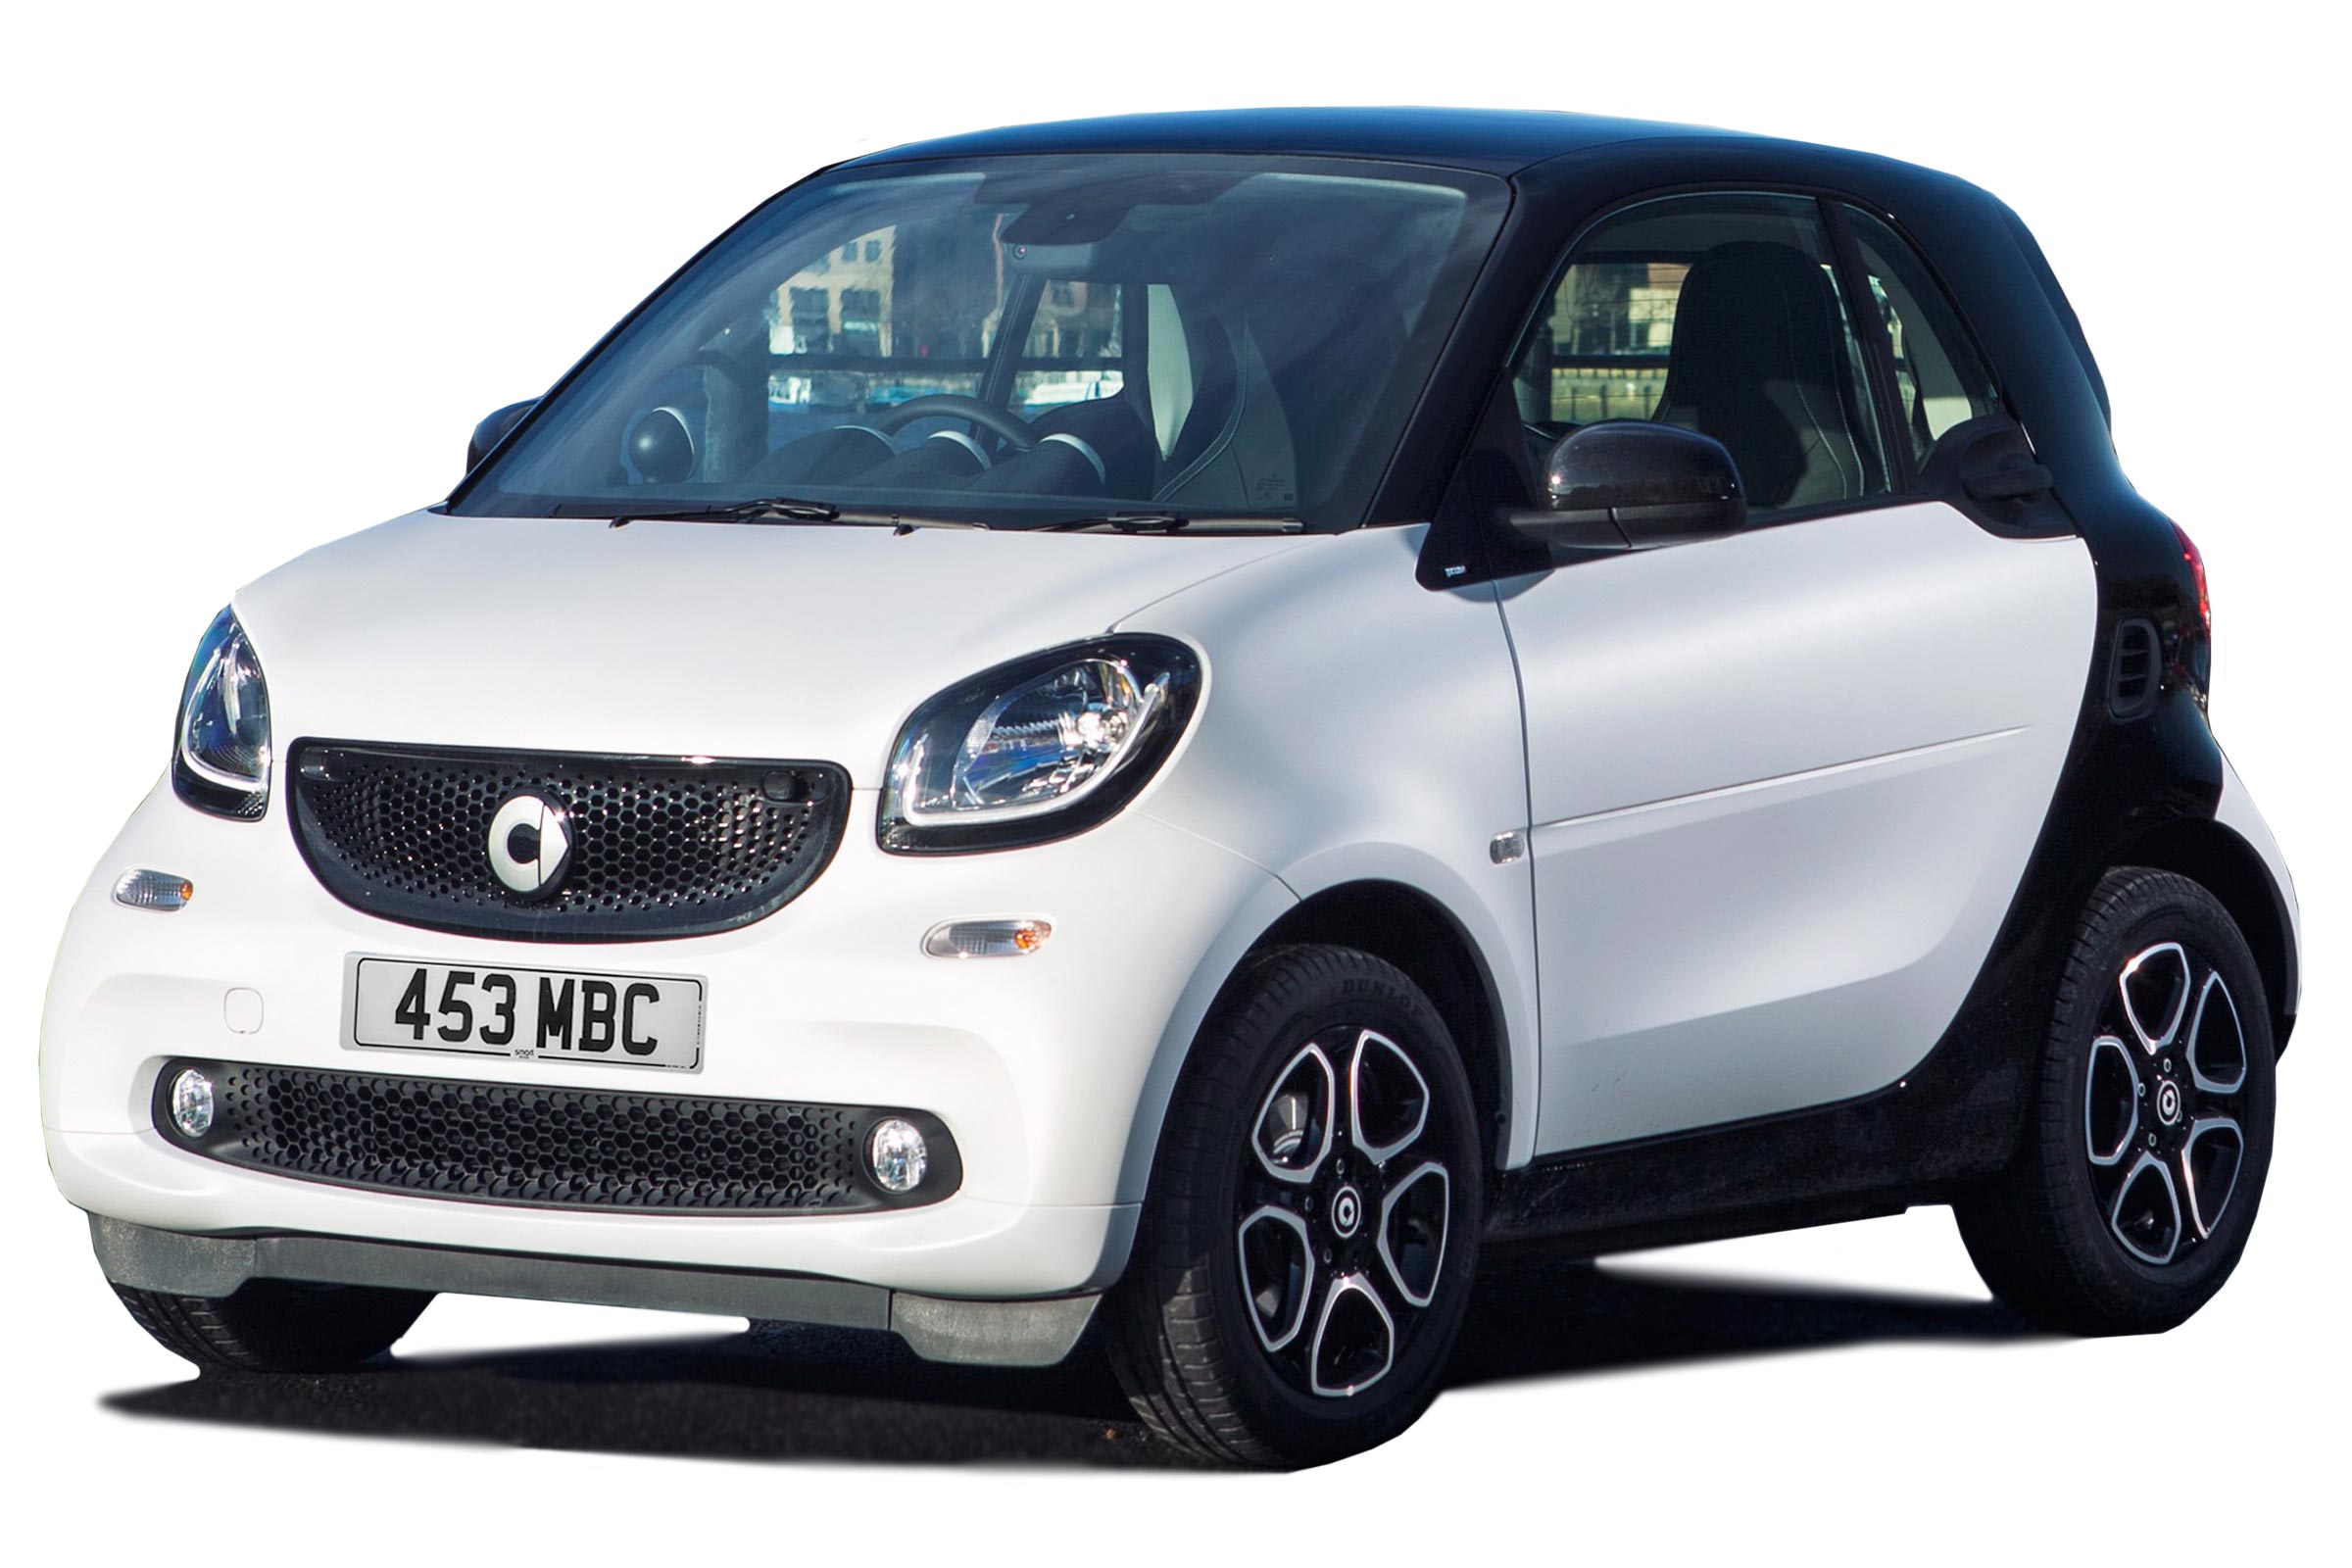 Smart Car Gas Mileage 2015 / Smart Car Mpg Everything You Need To Know